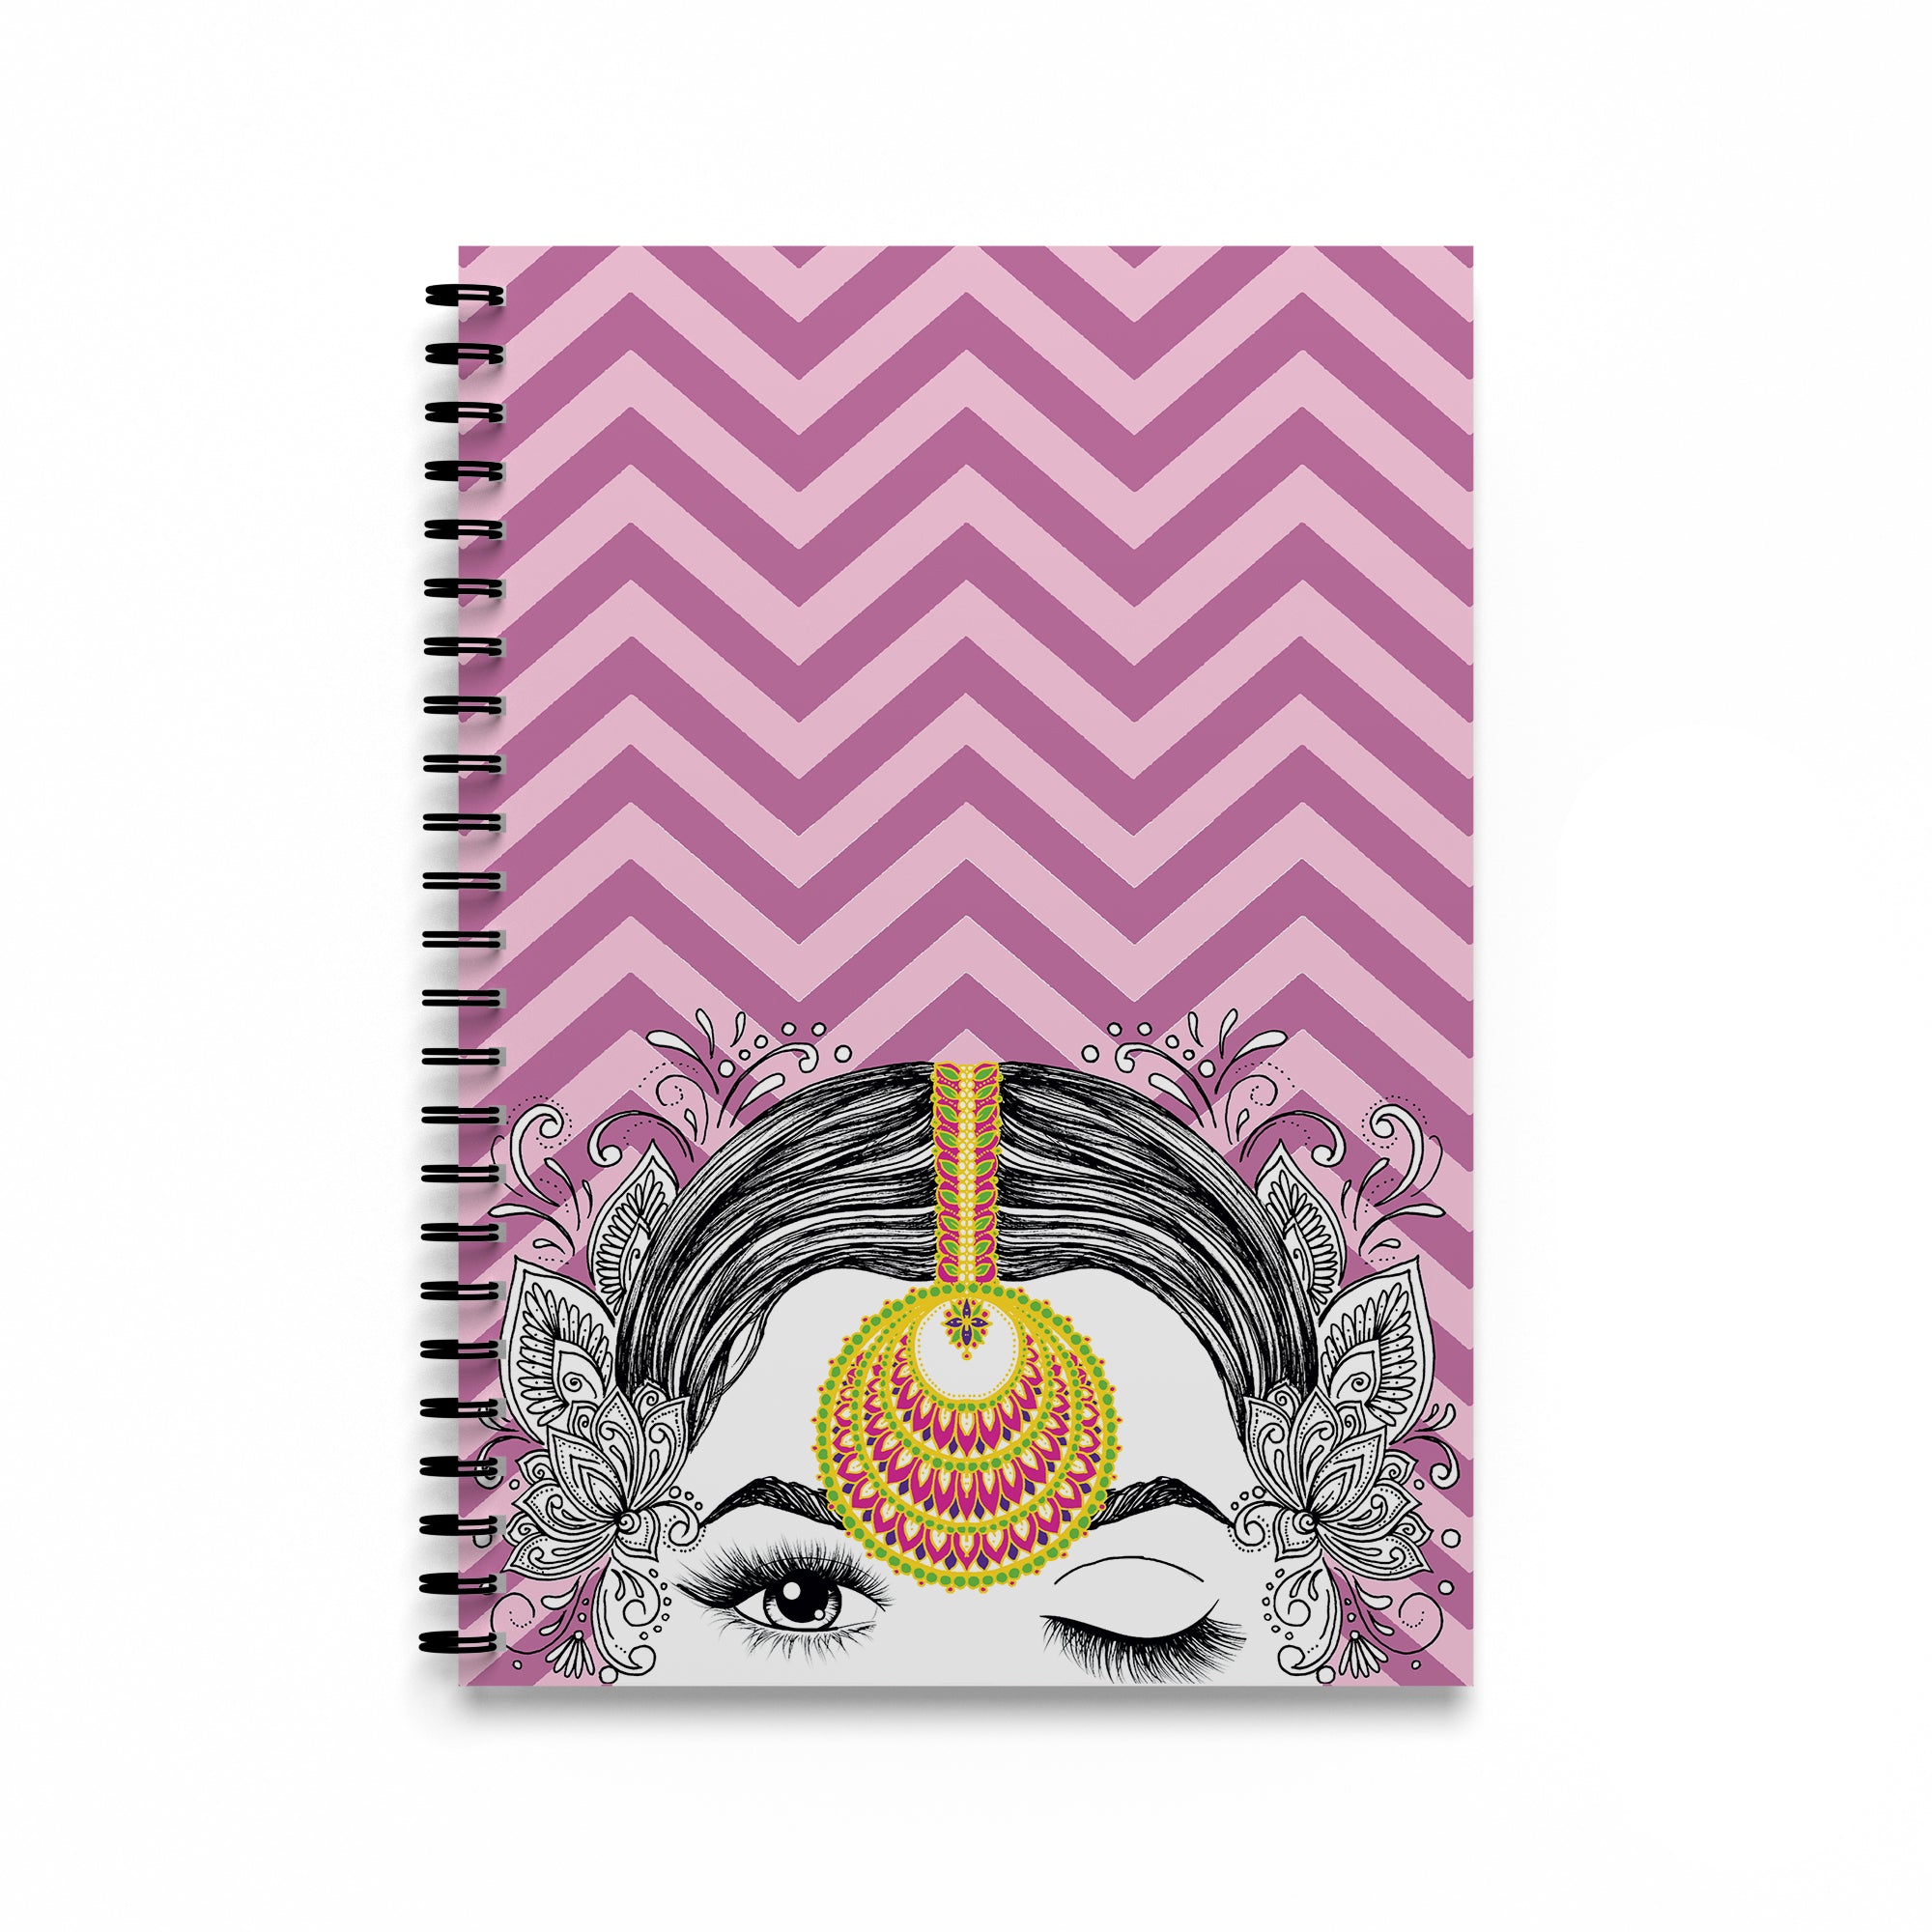 The Sassy One Spiral Notebook